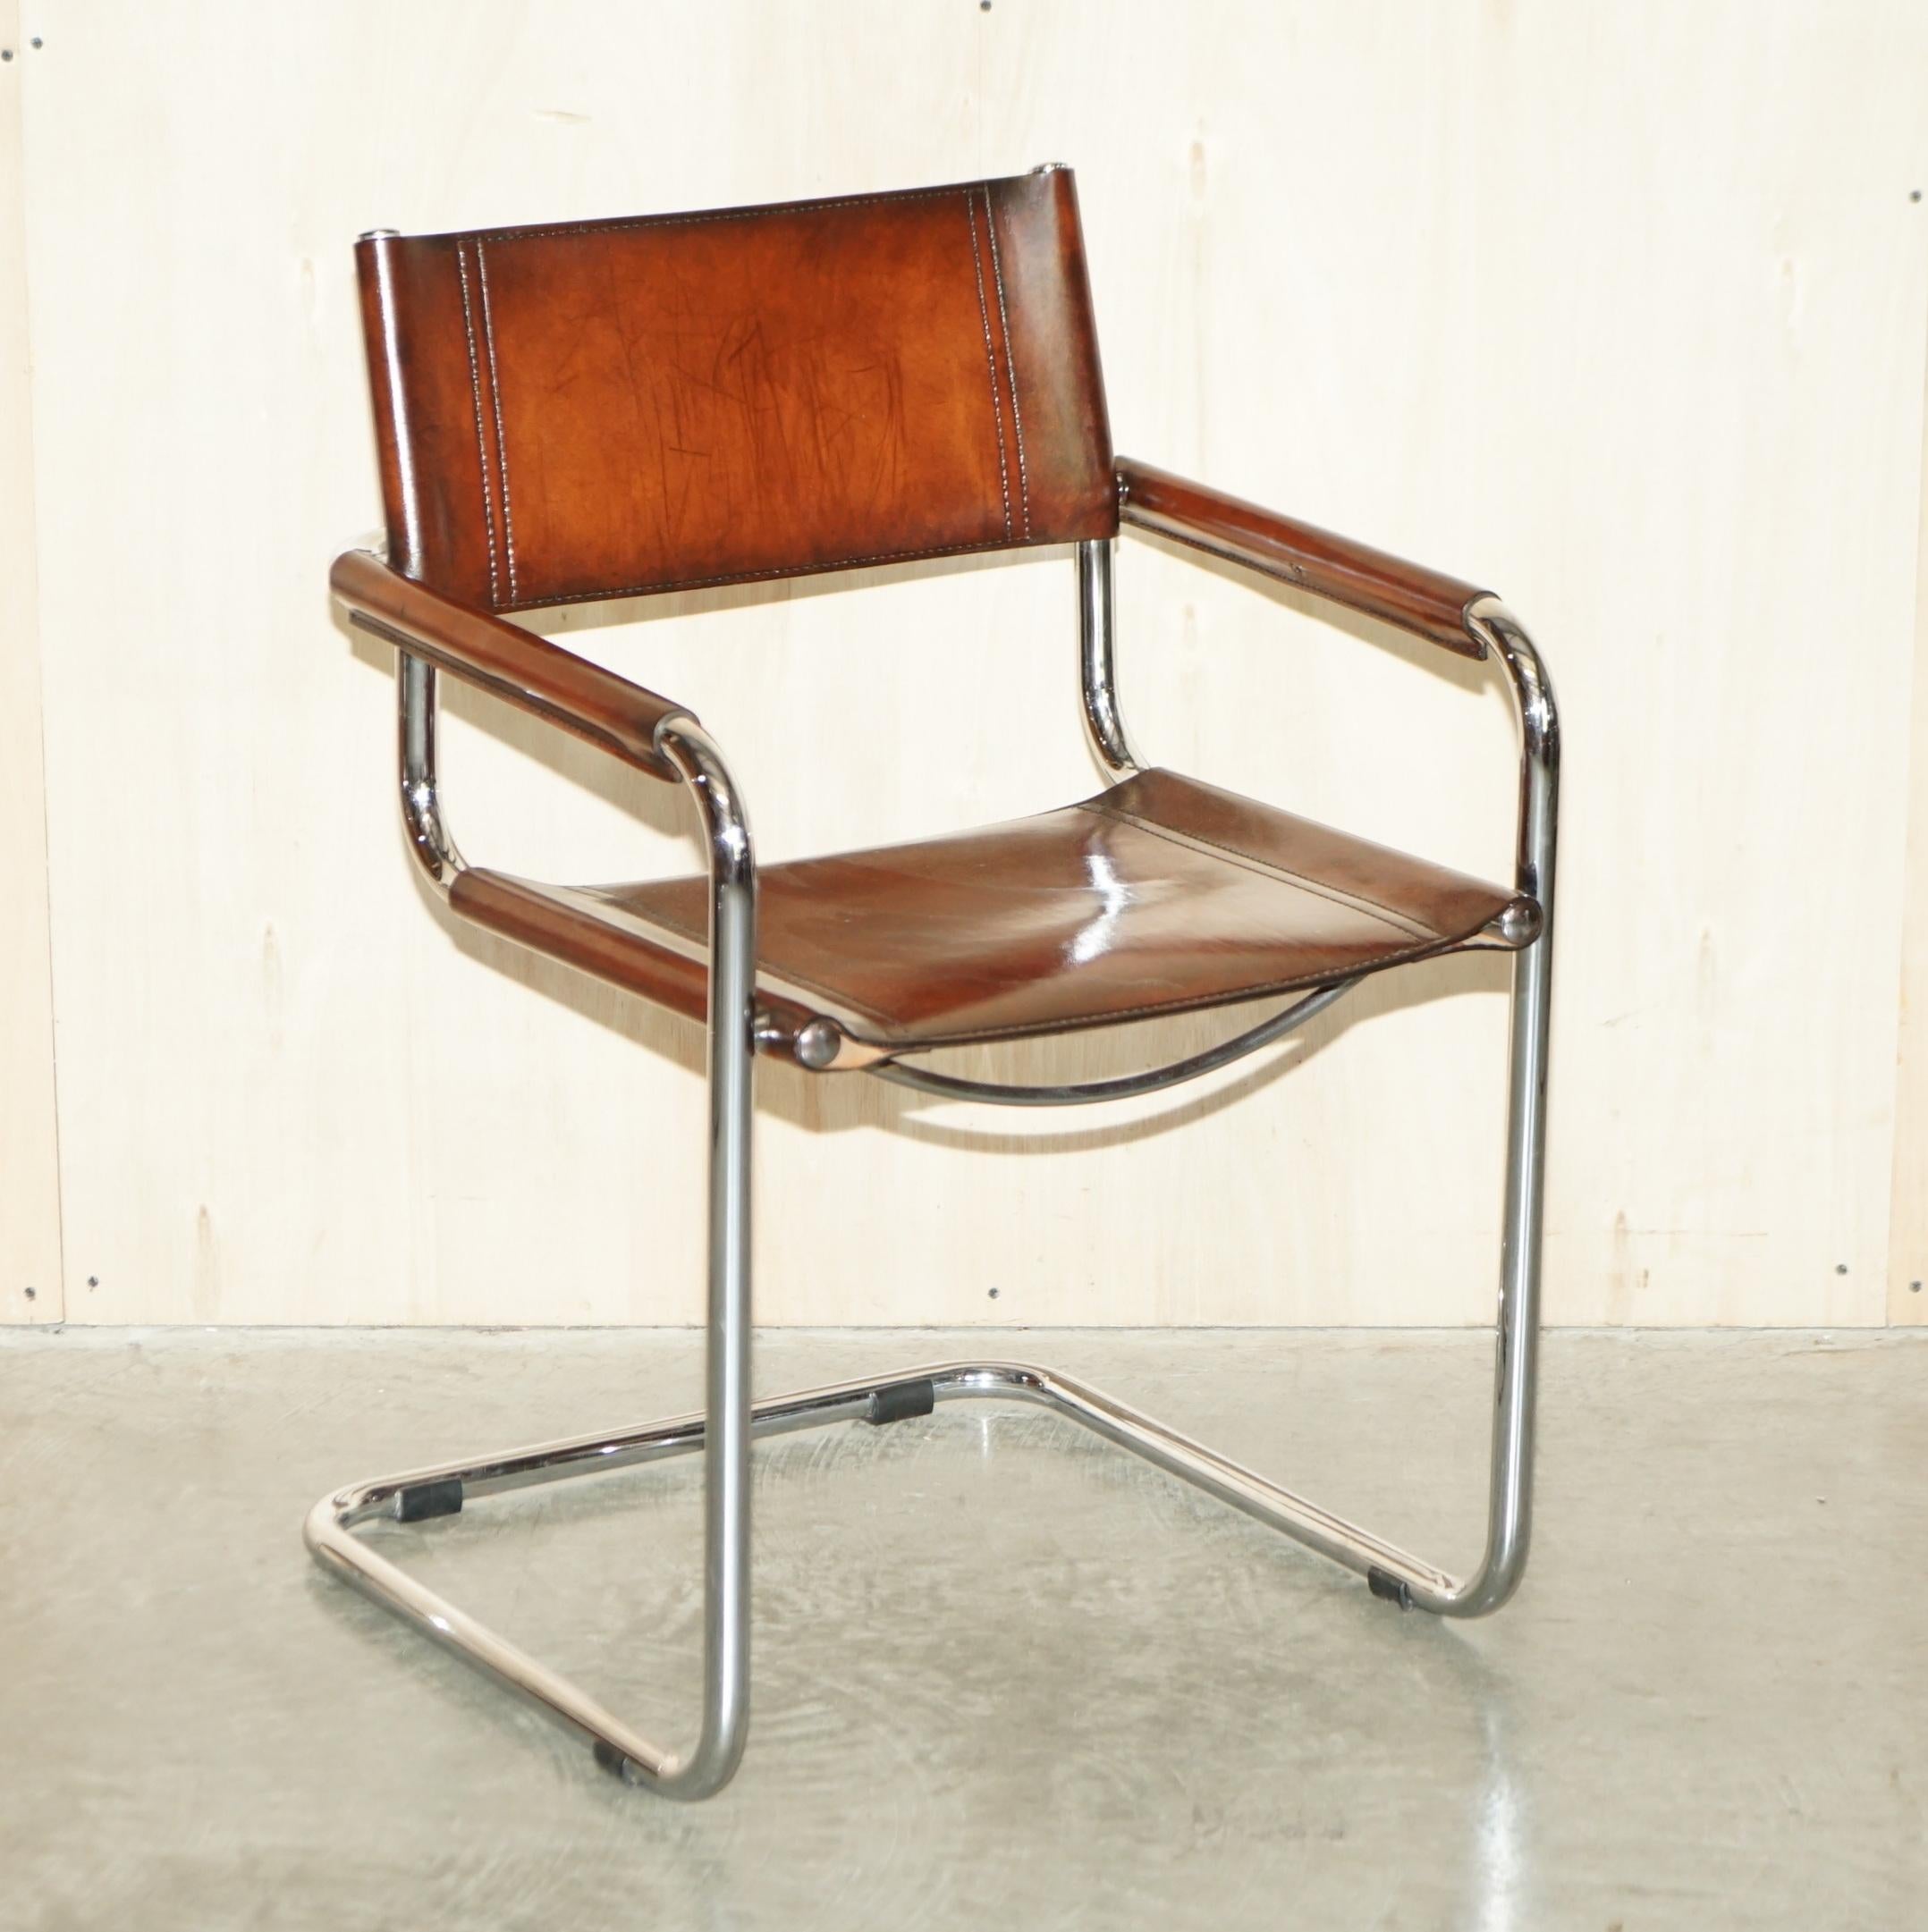 Royal House Antiques

Royal House Antiques is delighted to offer for sale this one of a kind suite of six, fully restored, Marcel Breuer, Fasem, B34 armchairs in hand dyed brown leather

Please note the delivery fee listed is just a guide, it covers